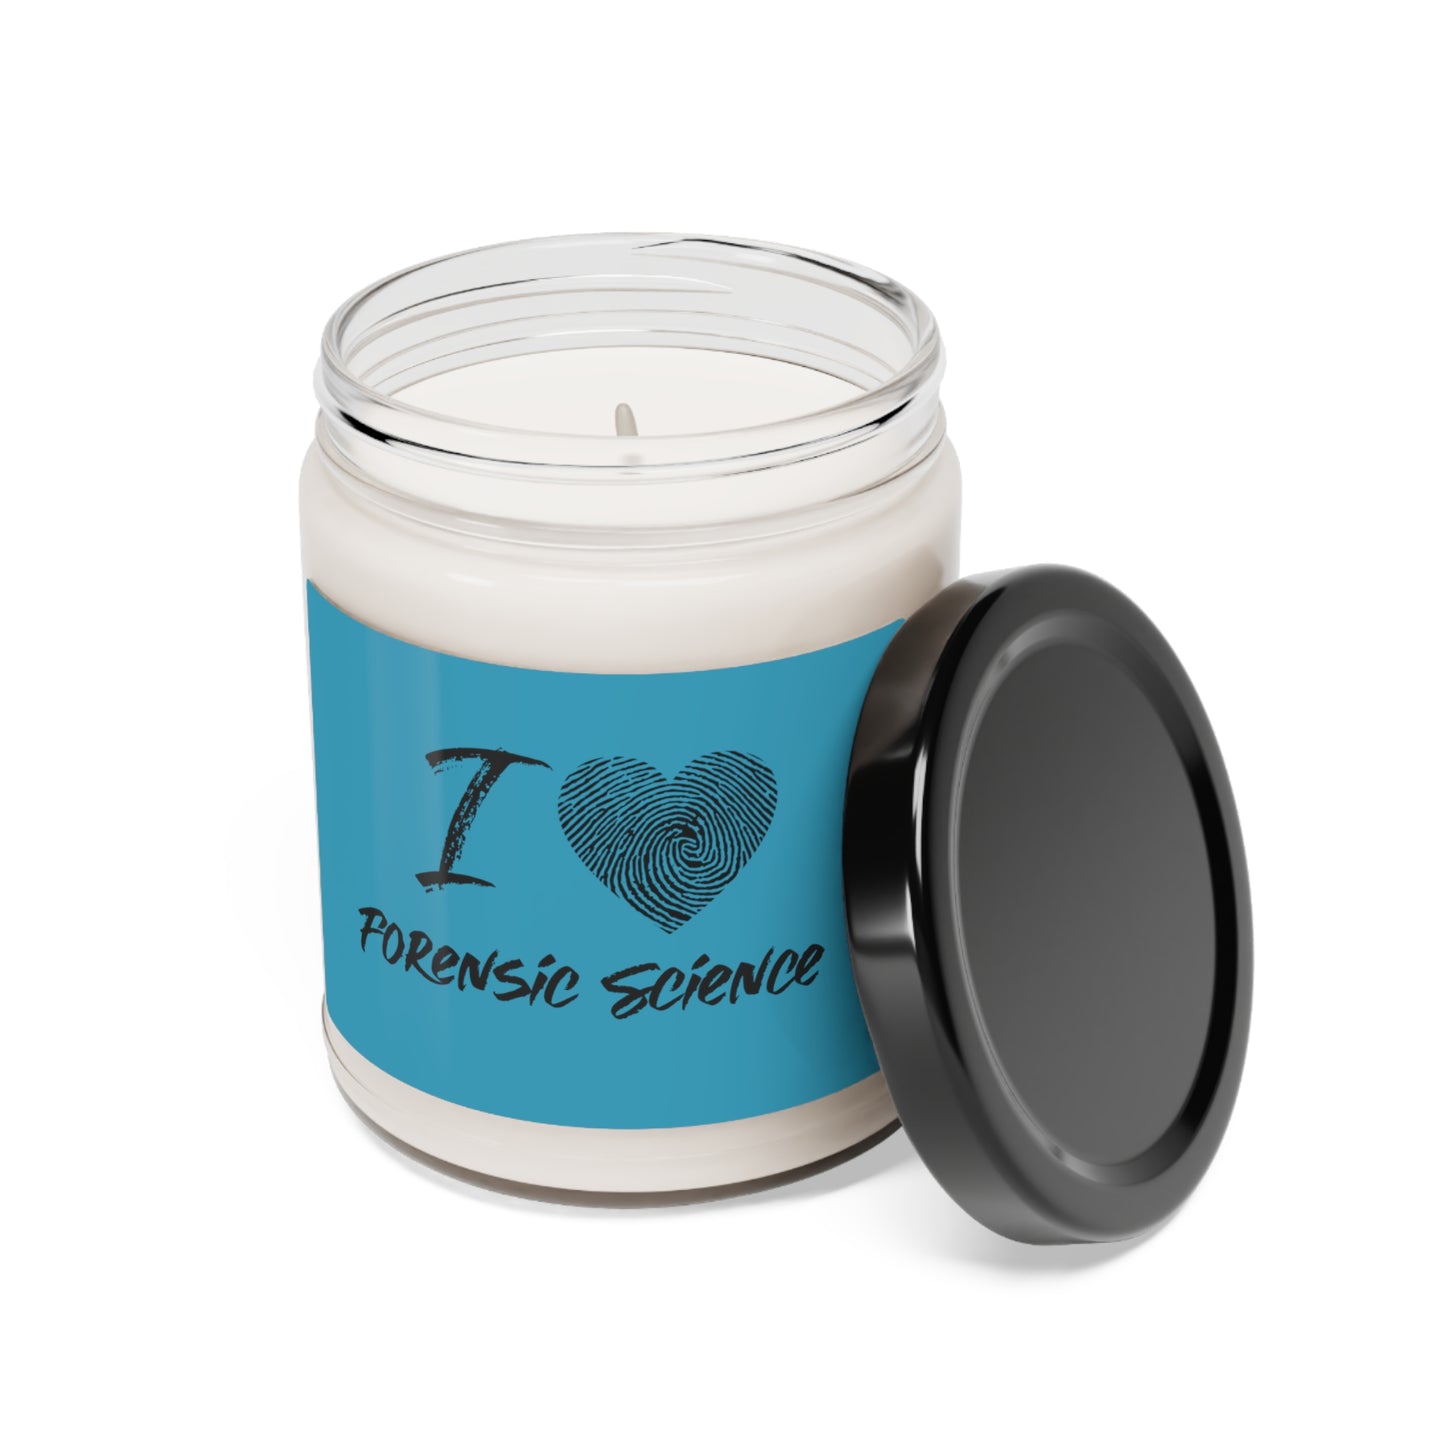 Candle - I Heart Forensic Science - Soy Candle, 9oz